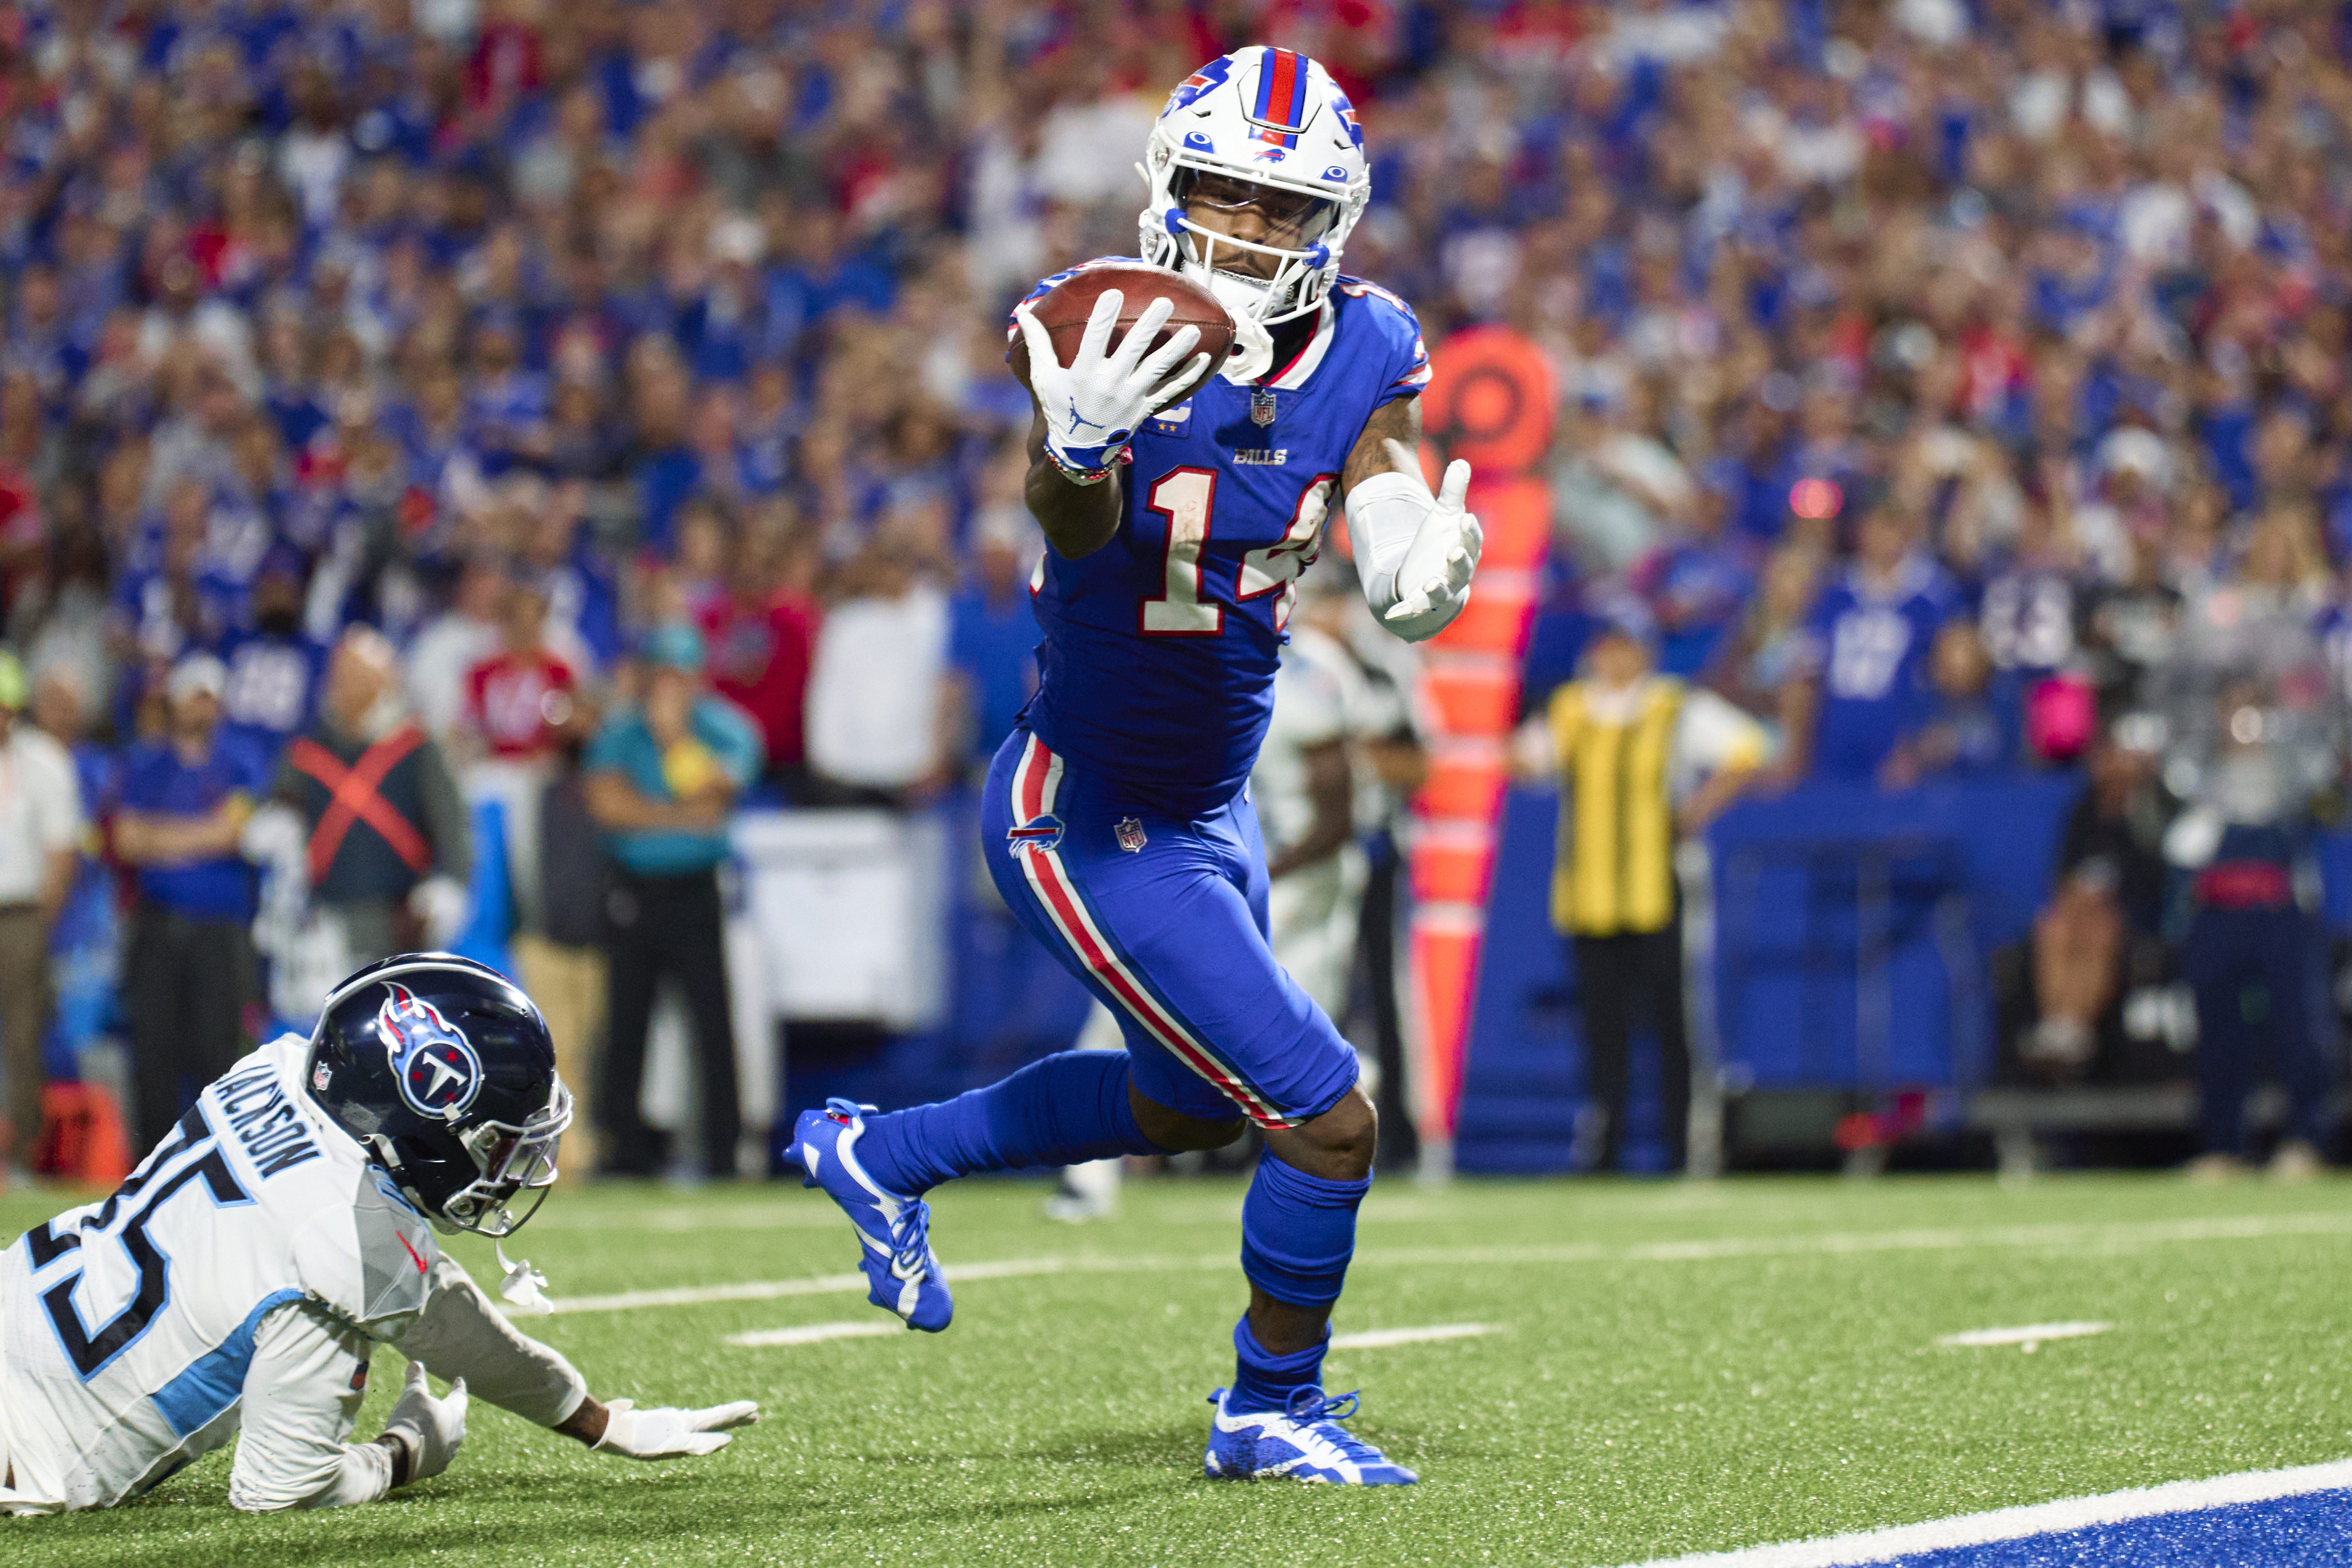 Wide receiver Stefon Diggs (#14) of the Buffalo Bills catches the ball to score a touchdown in the game against the Tennessee Titans at Highmark Stadium in Orchard Park, New York, September 19, 2022. /CFP